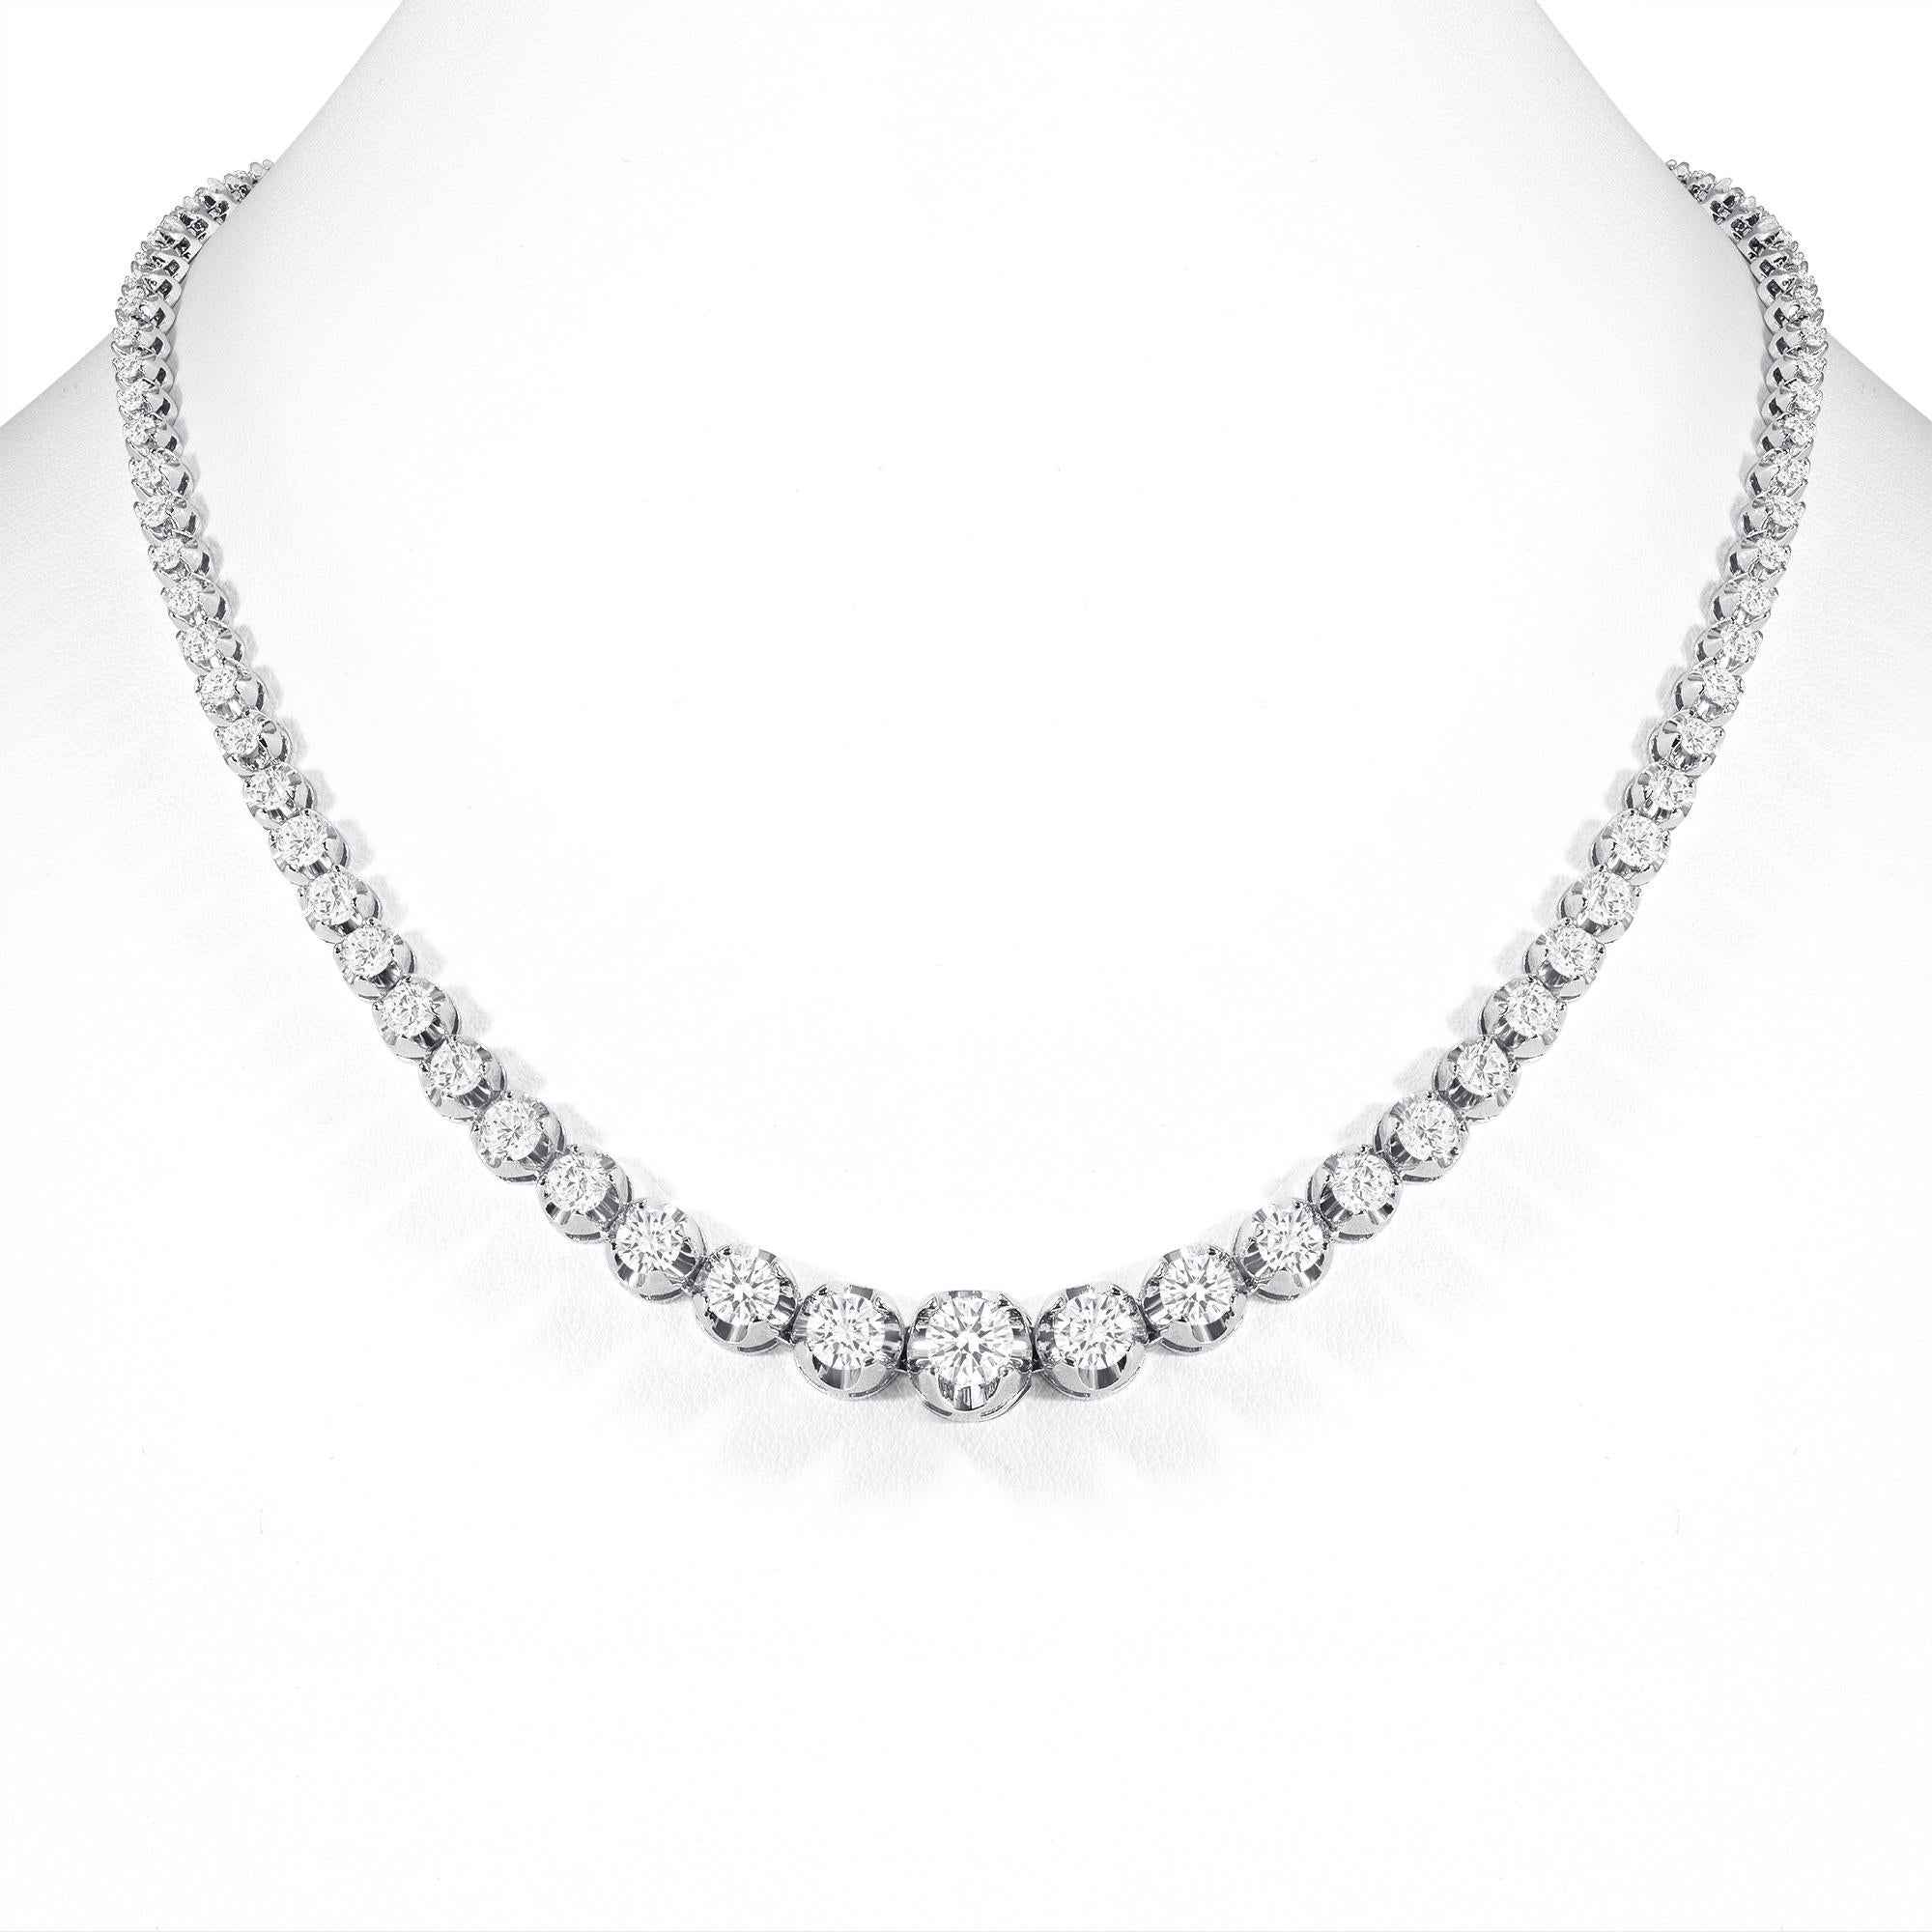 This finely made graduated necklace with beautiful round diamonds sits elegantly on any neck. 

Metal: 14k Gold
Diamond Cut: Round
Total Diamond Approx. Carats:  7ct
Diamond Clarity: VS
Diamond Color: F-G
Size: 16 inches
Color: White Gold
Included